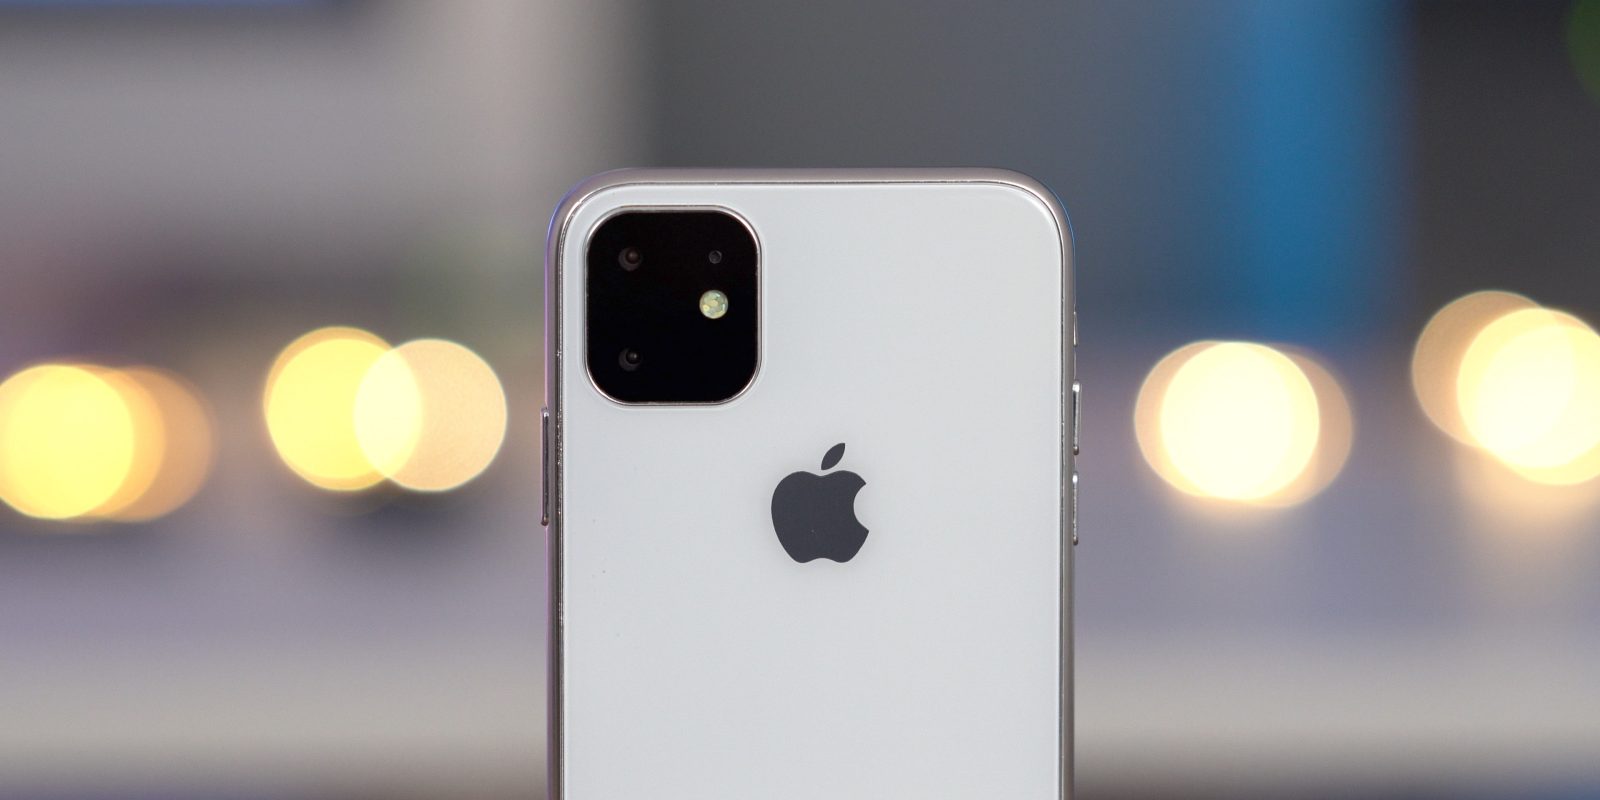 Kuo Key 2020 Iphone Upgrades Will Be All New Design 5g And Improved Cameras 9to5mac